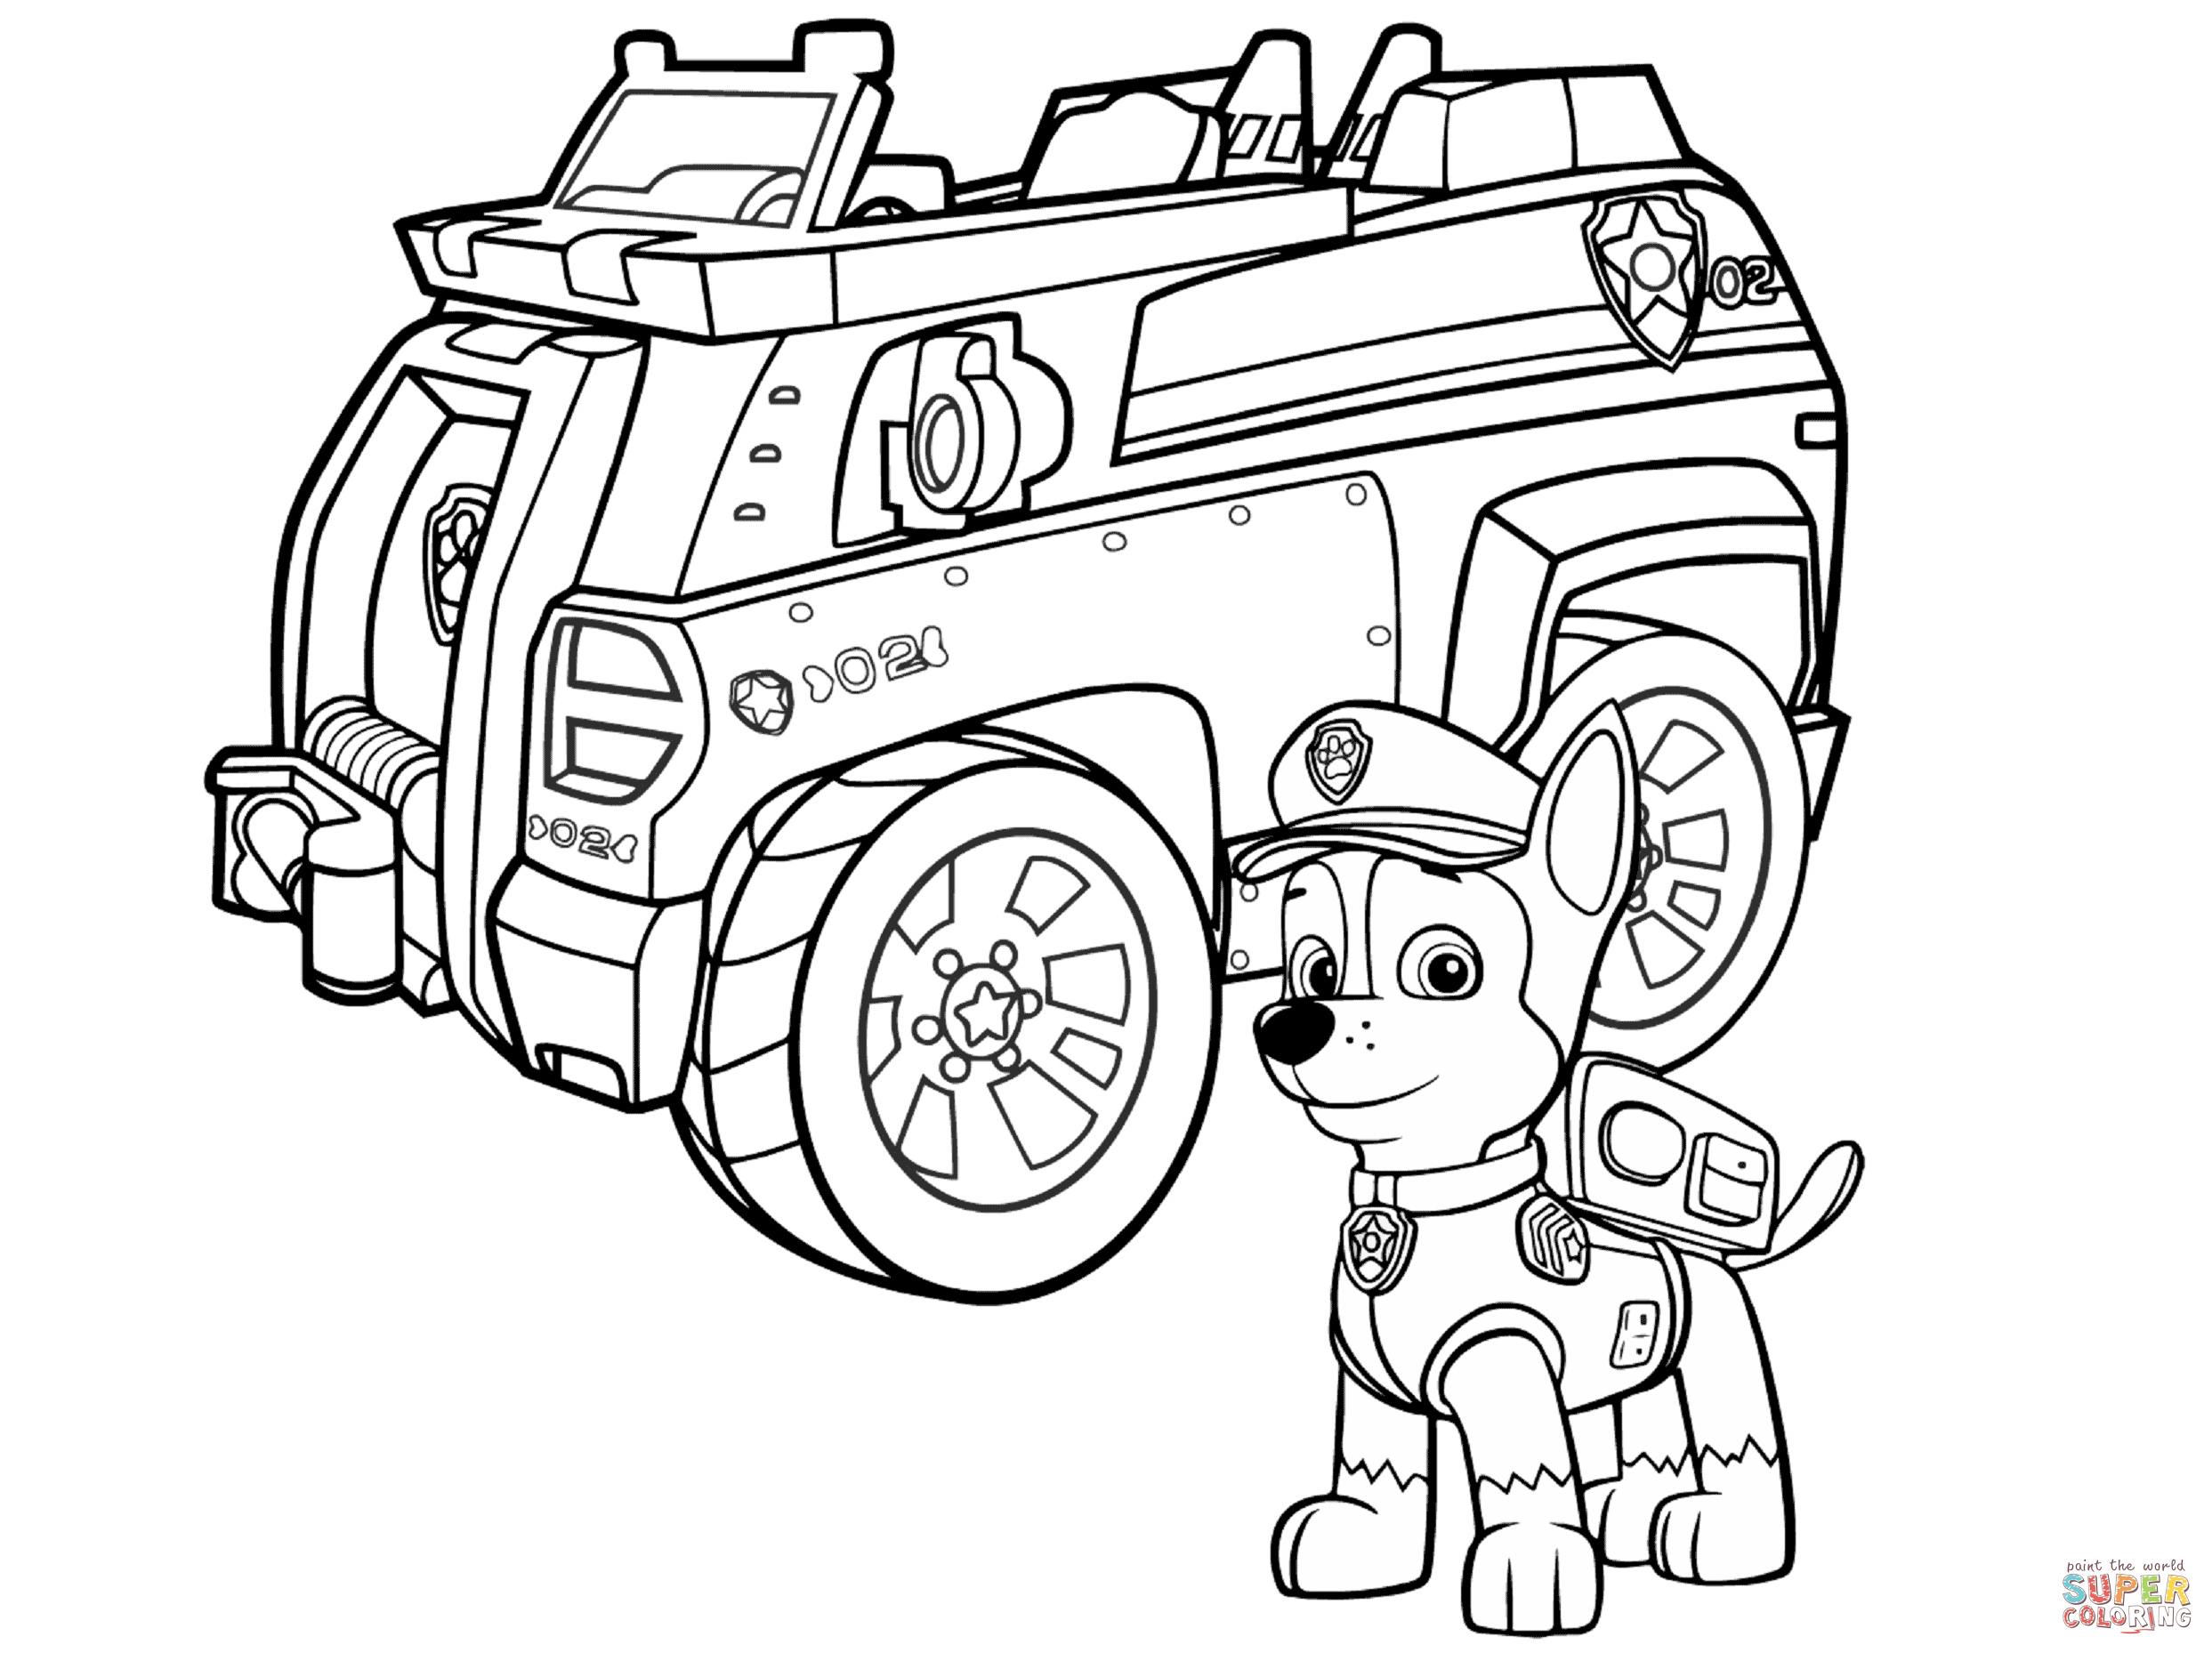 Paw Patrol Coloring Pages Marshall Paw Patrol Coloring Pages Free Coloring Pages